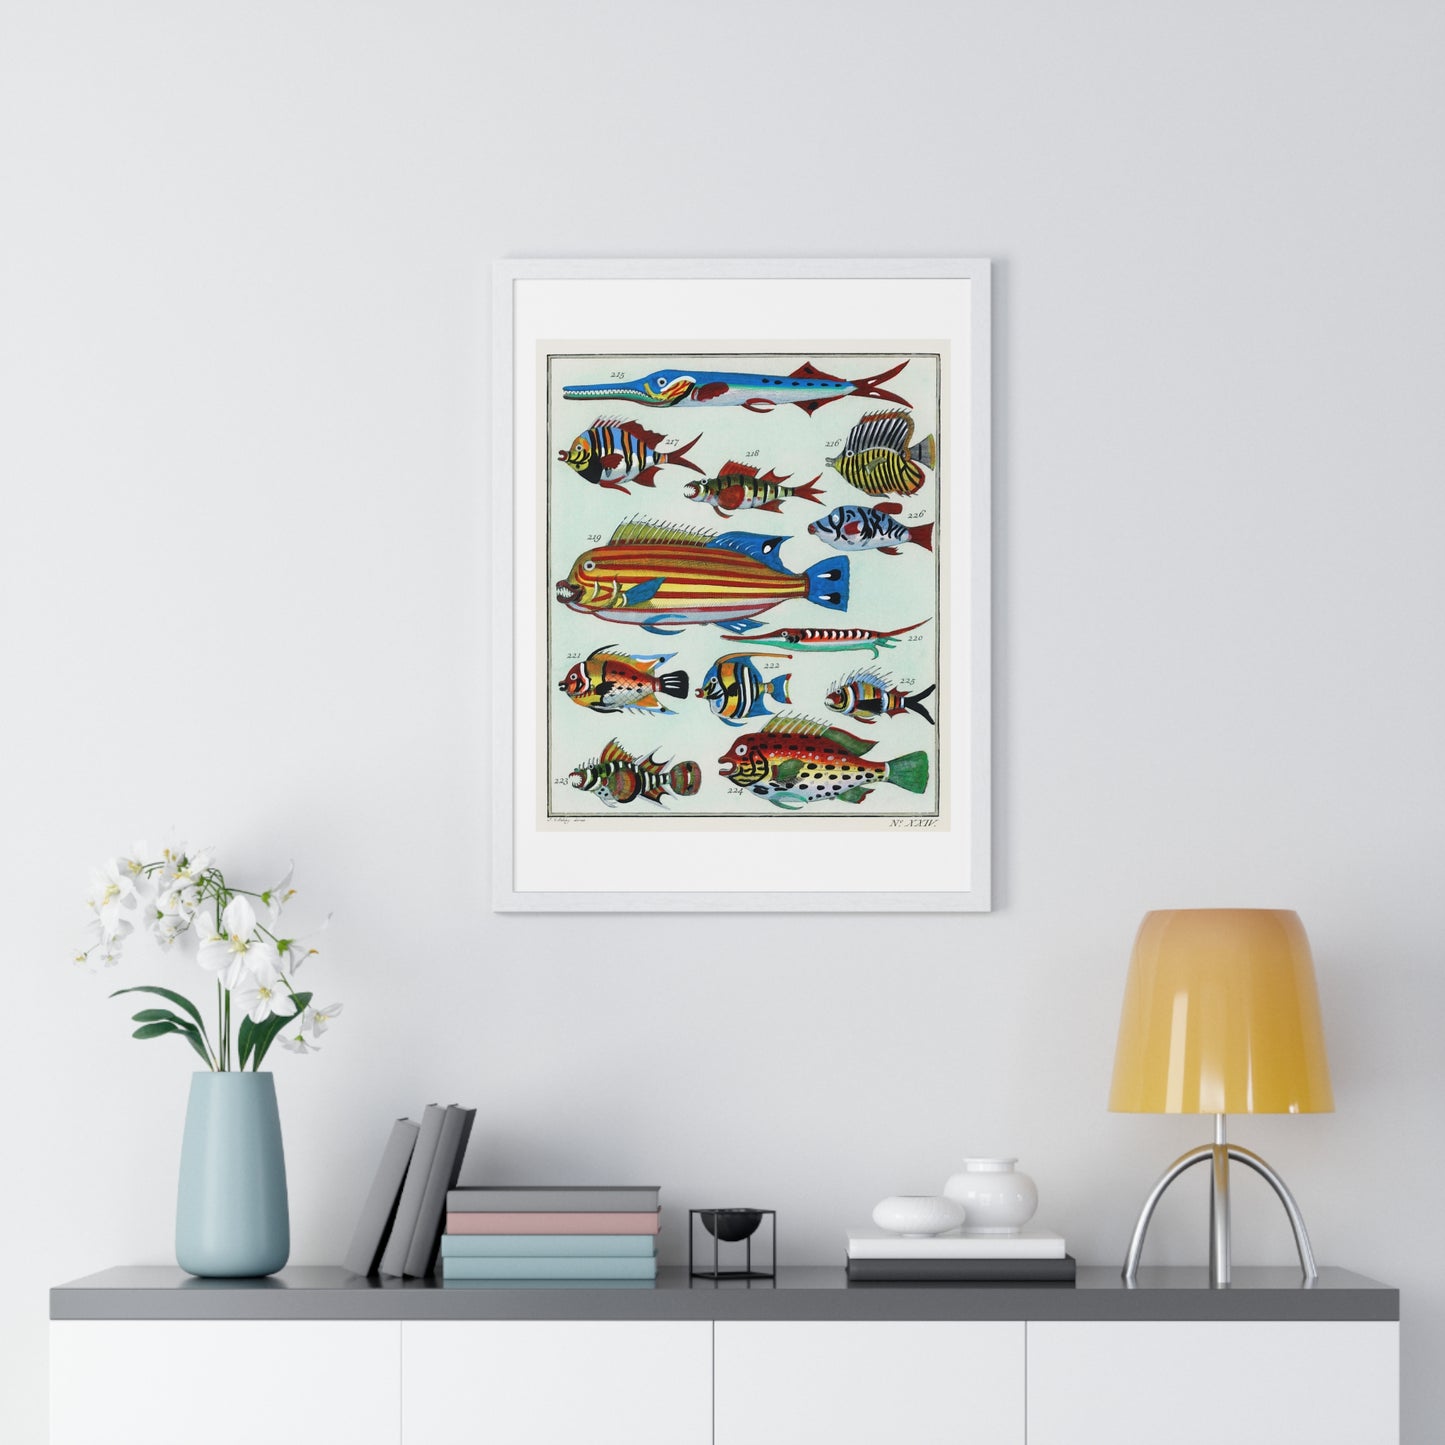 L’Histoire Générale des Voyages (1747-1780) by Unknown, a Collage of Colourful Rare Exotic Fish, from the Original, Framed Print